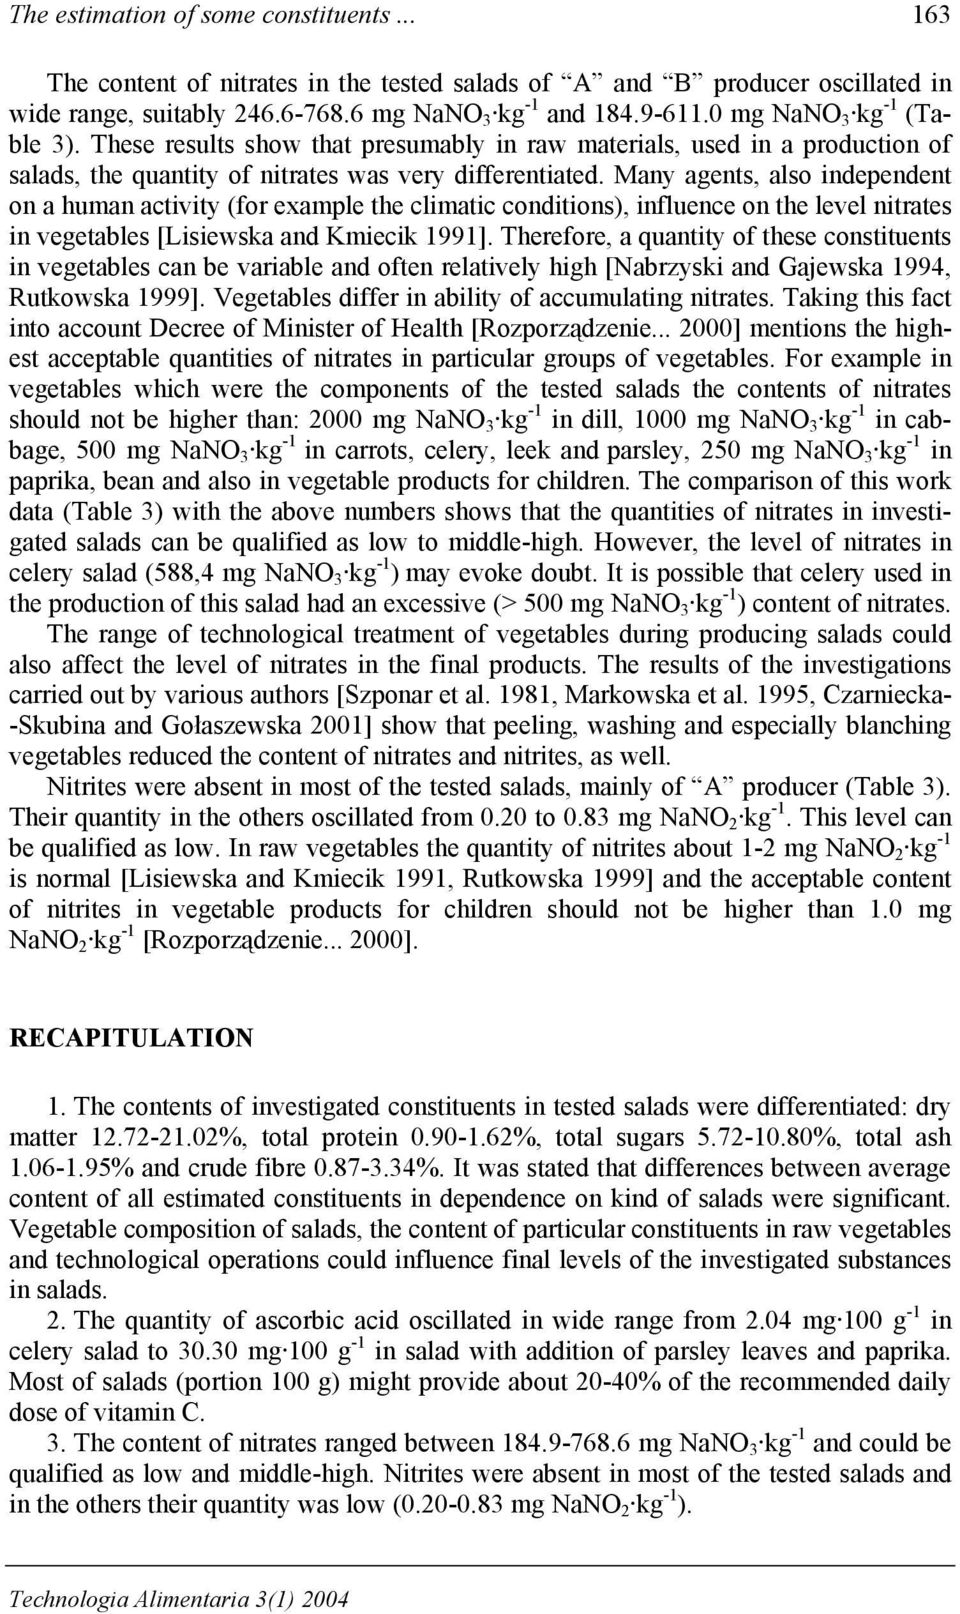 Many agents, also independent on a human activity (for example the climatic conditions), influence on the level nitrates in vegetables [Lisiewska and Kmiecik 1991].